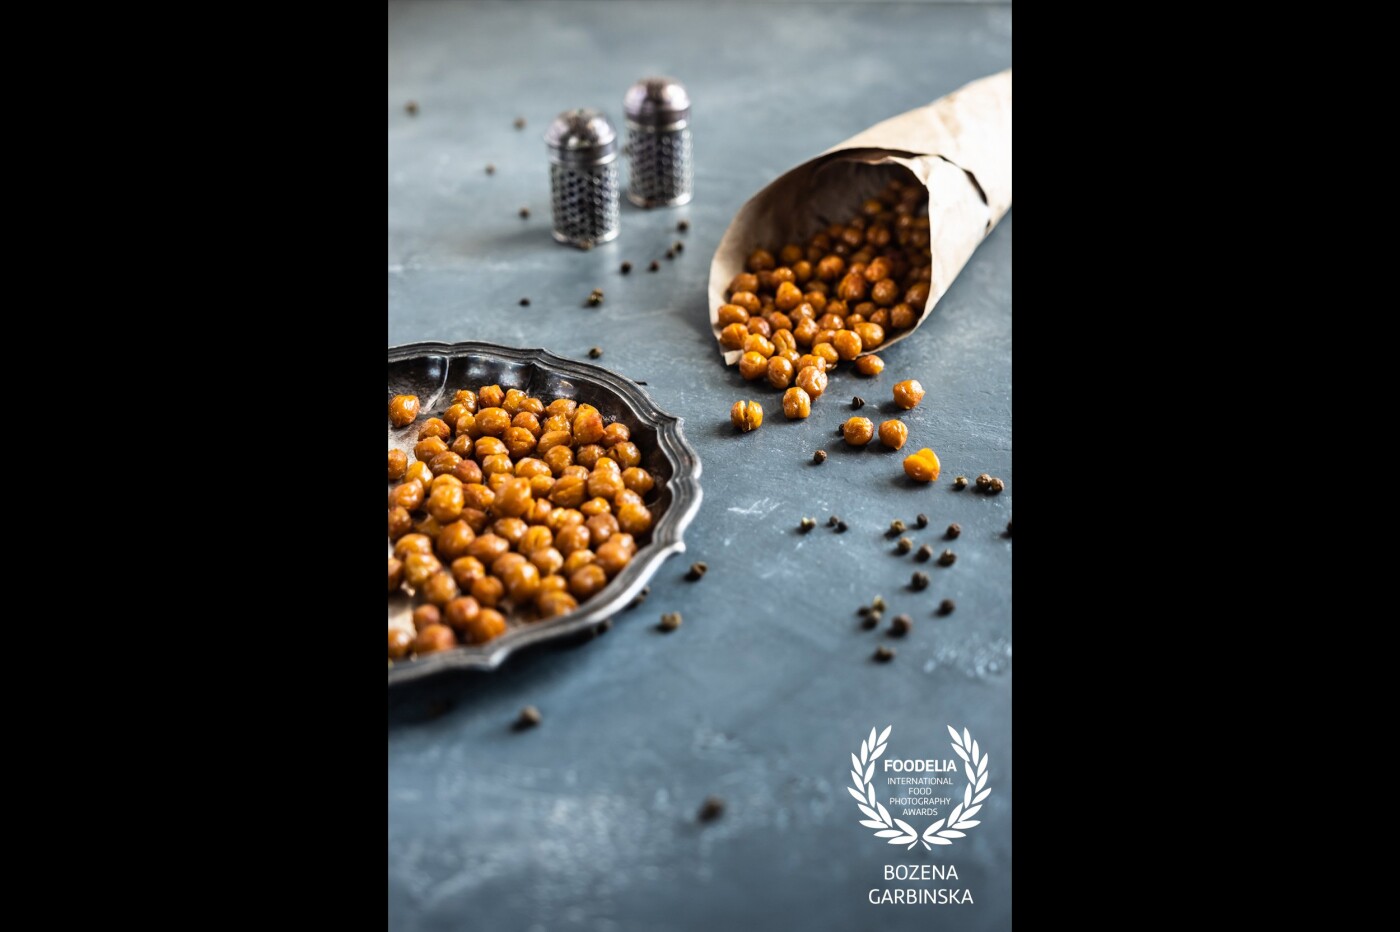 Roasted chickpeas seasoned smoked paprika, pepper and salt.<br />
I took the photo in daylight by camera Fuji X-T20 and lens 16-55 F2.8